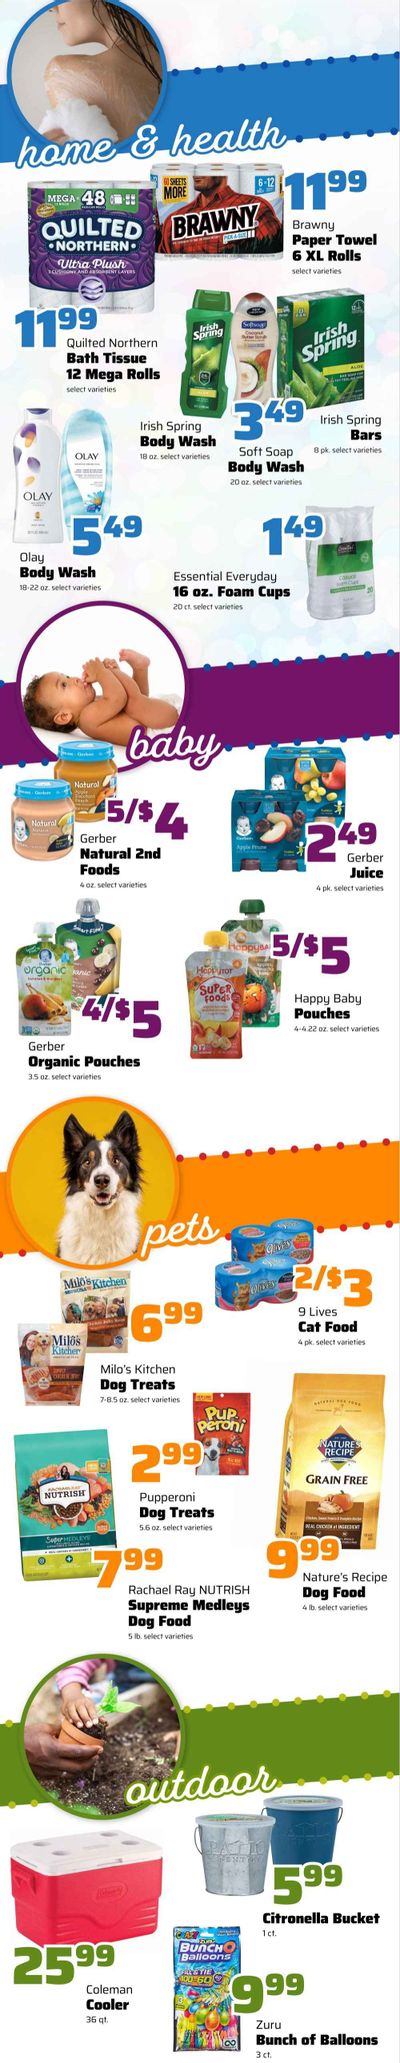 County Market (IL, IN, MO) Weekly Ad Flyer June 9 to June 15